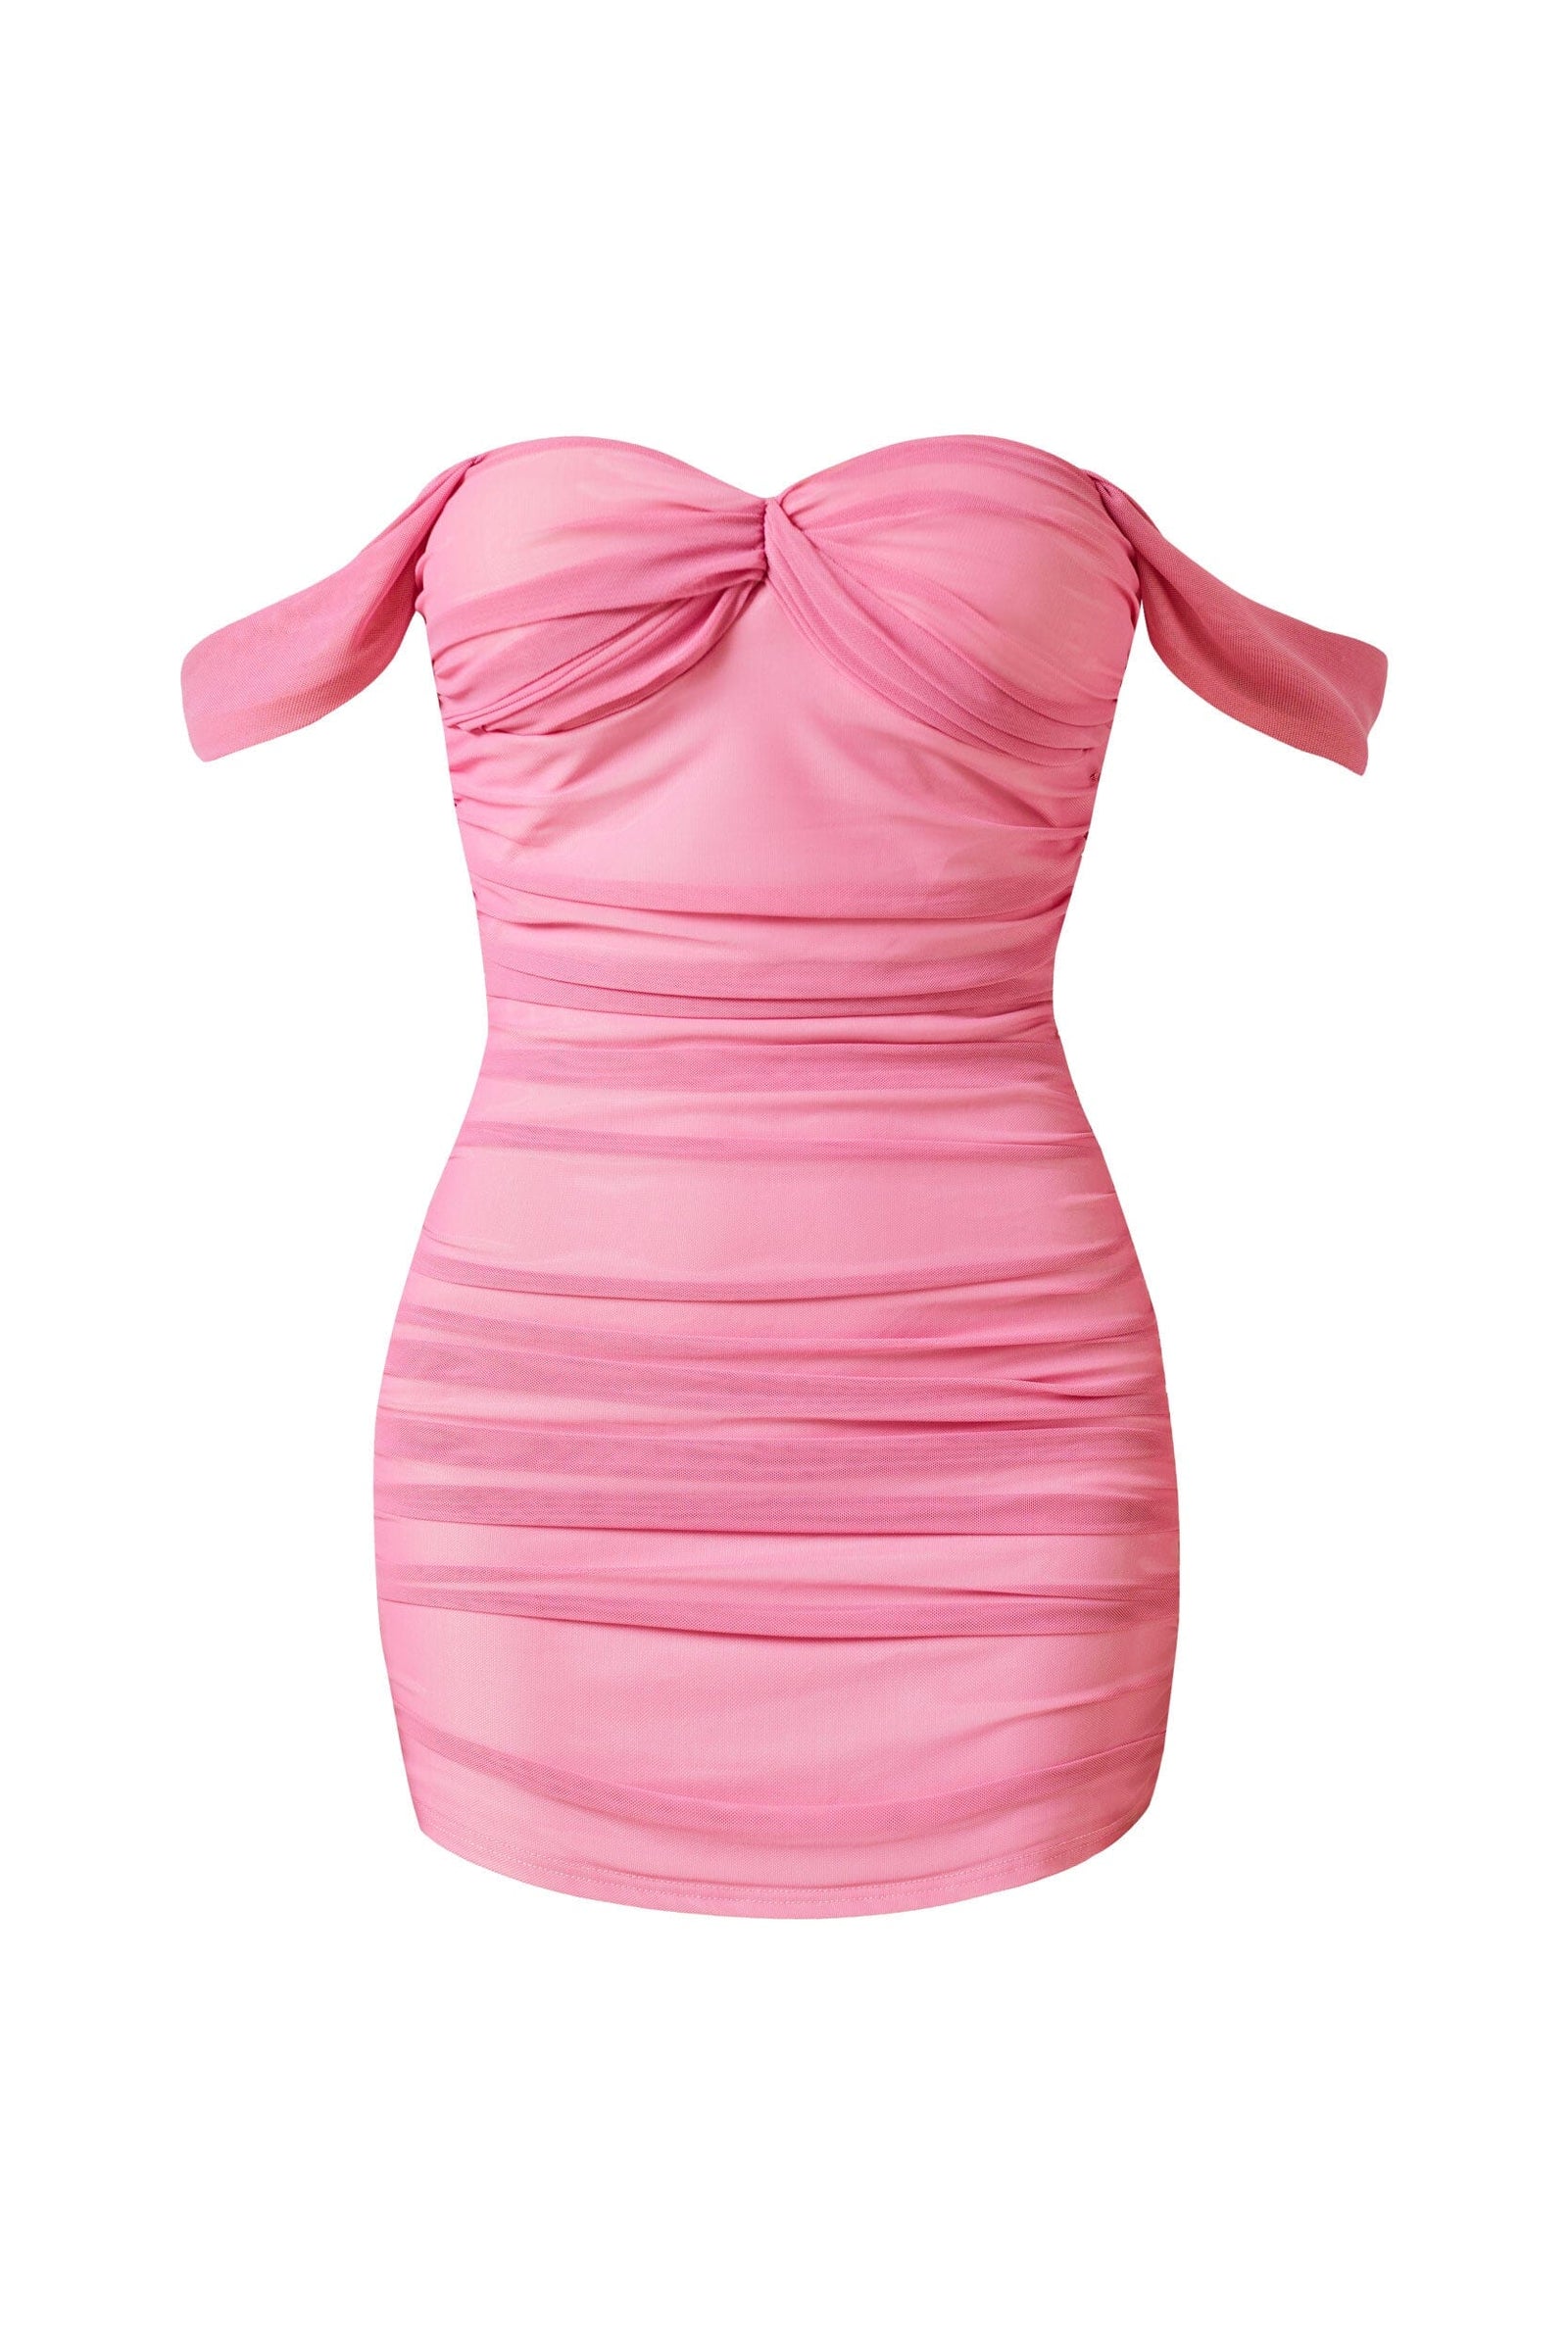 Shop Priceless | Bliss | Pink | Ruched | Dress